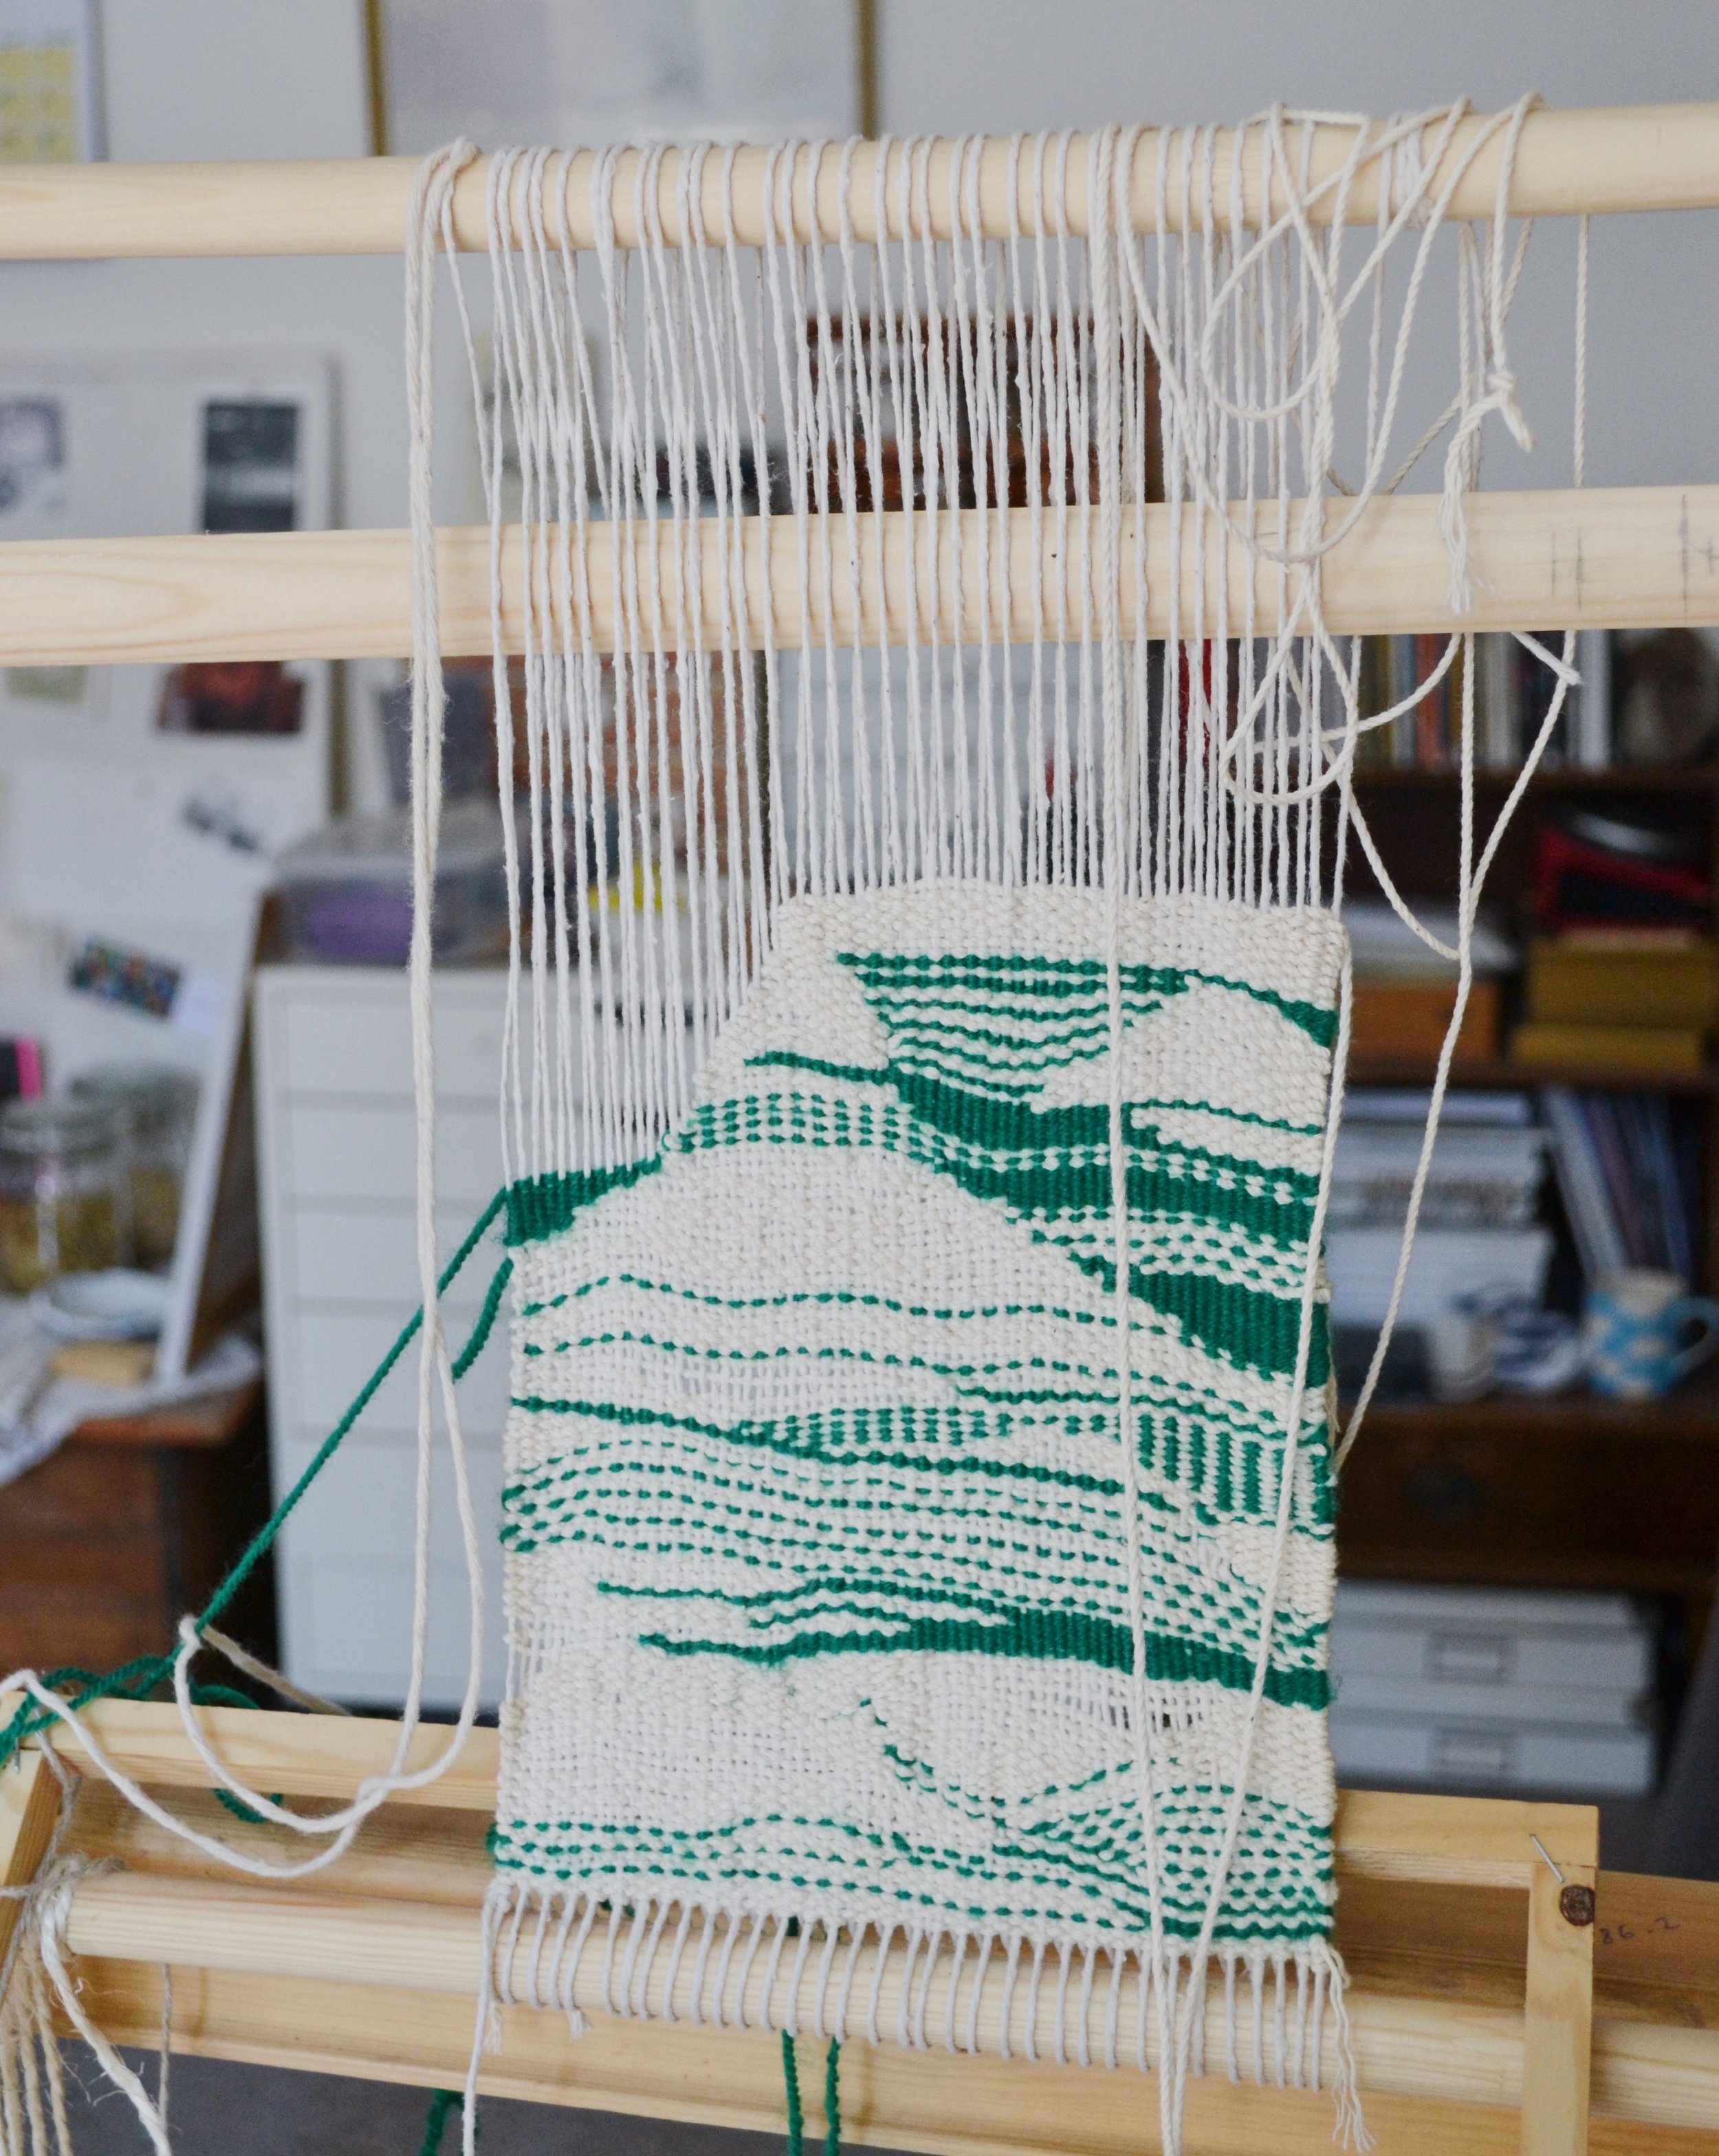 How to Start Weaving for Little Cost